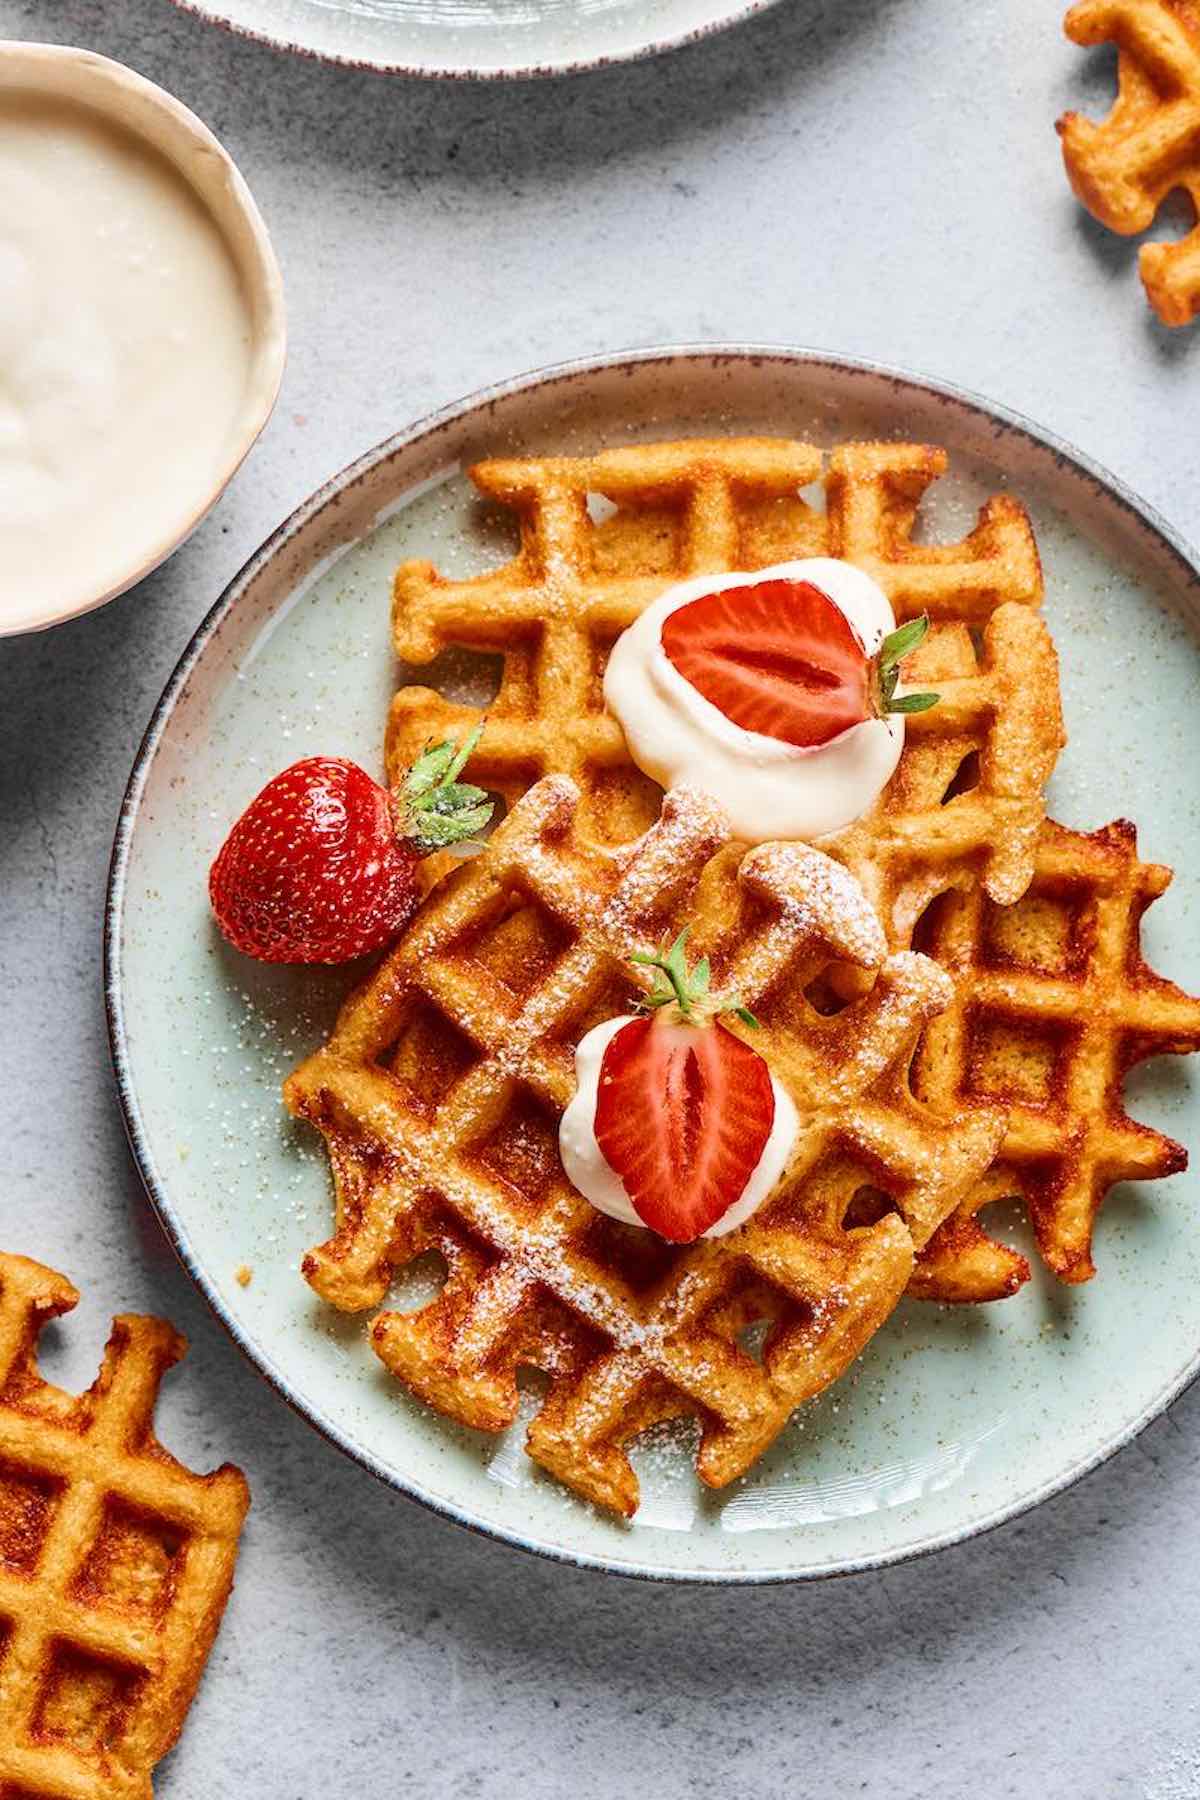 Basic waffles recipe (from 6 months+)